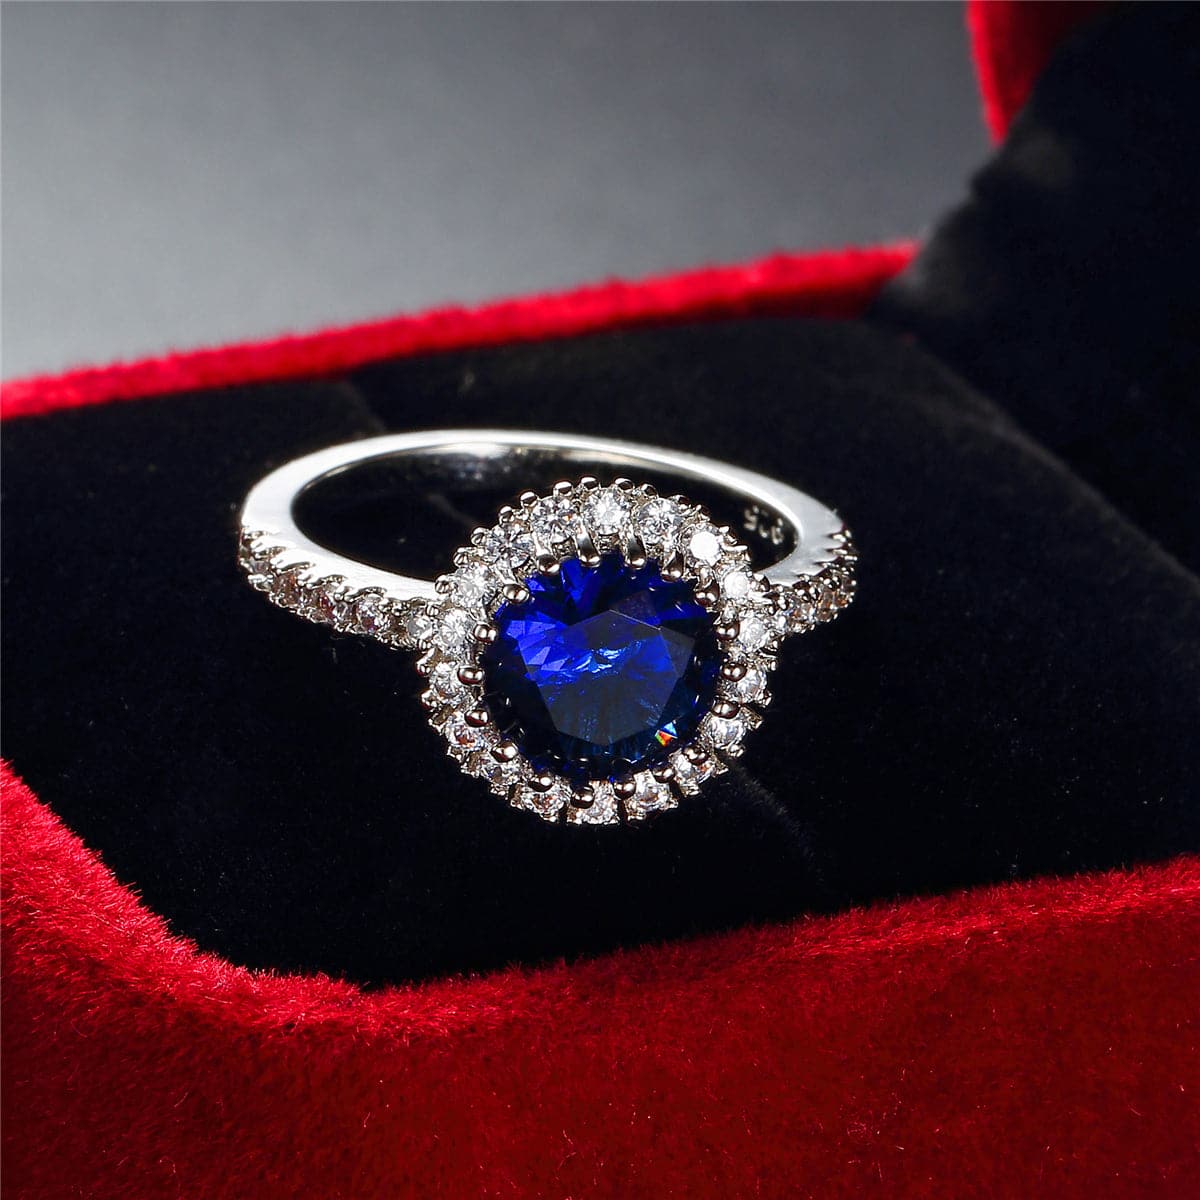 Navy Crystal & Silver-Plated Halo Ring